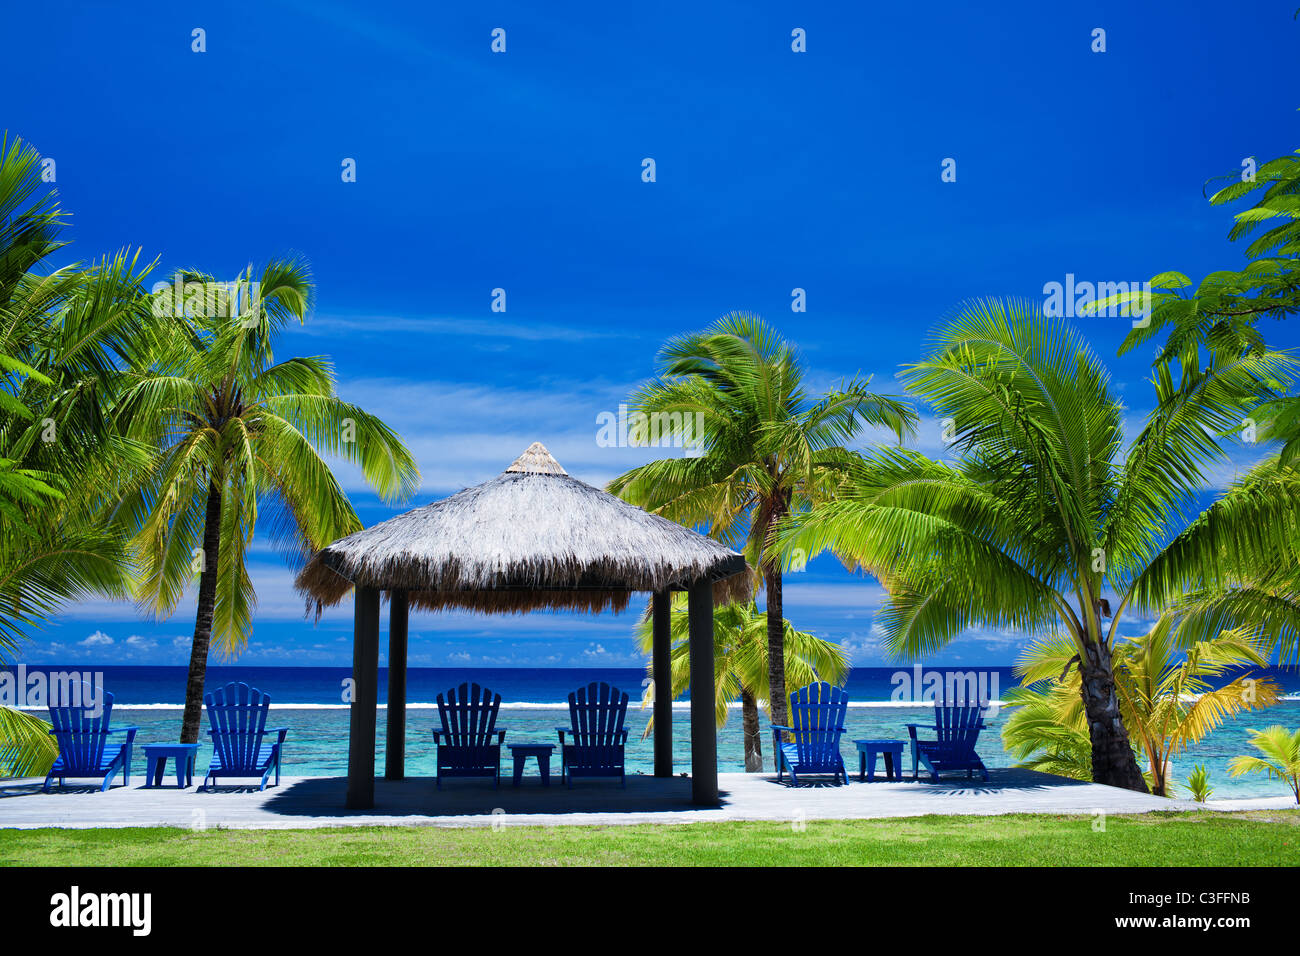 Blue chairs on a beach front on amazing beach Stock Photo